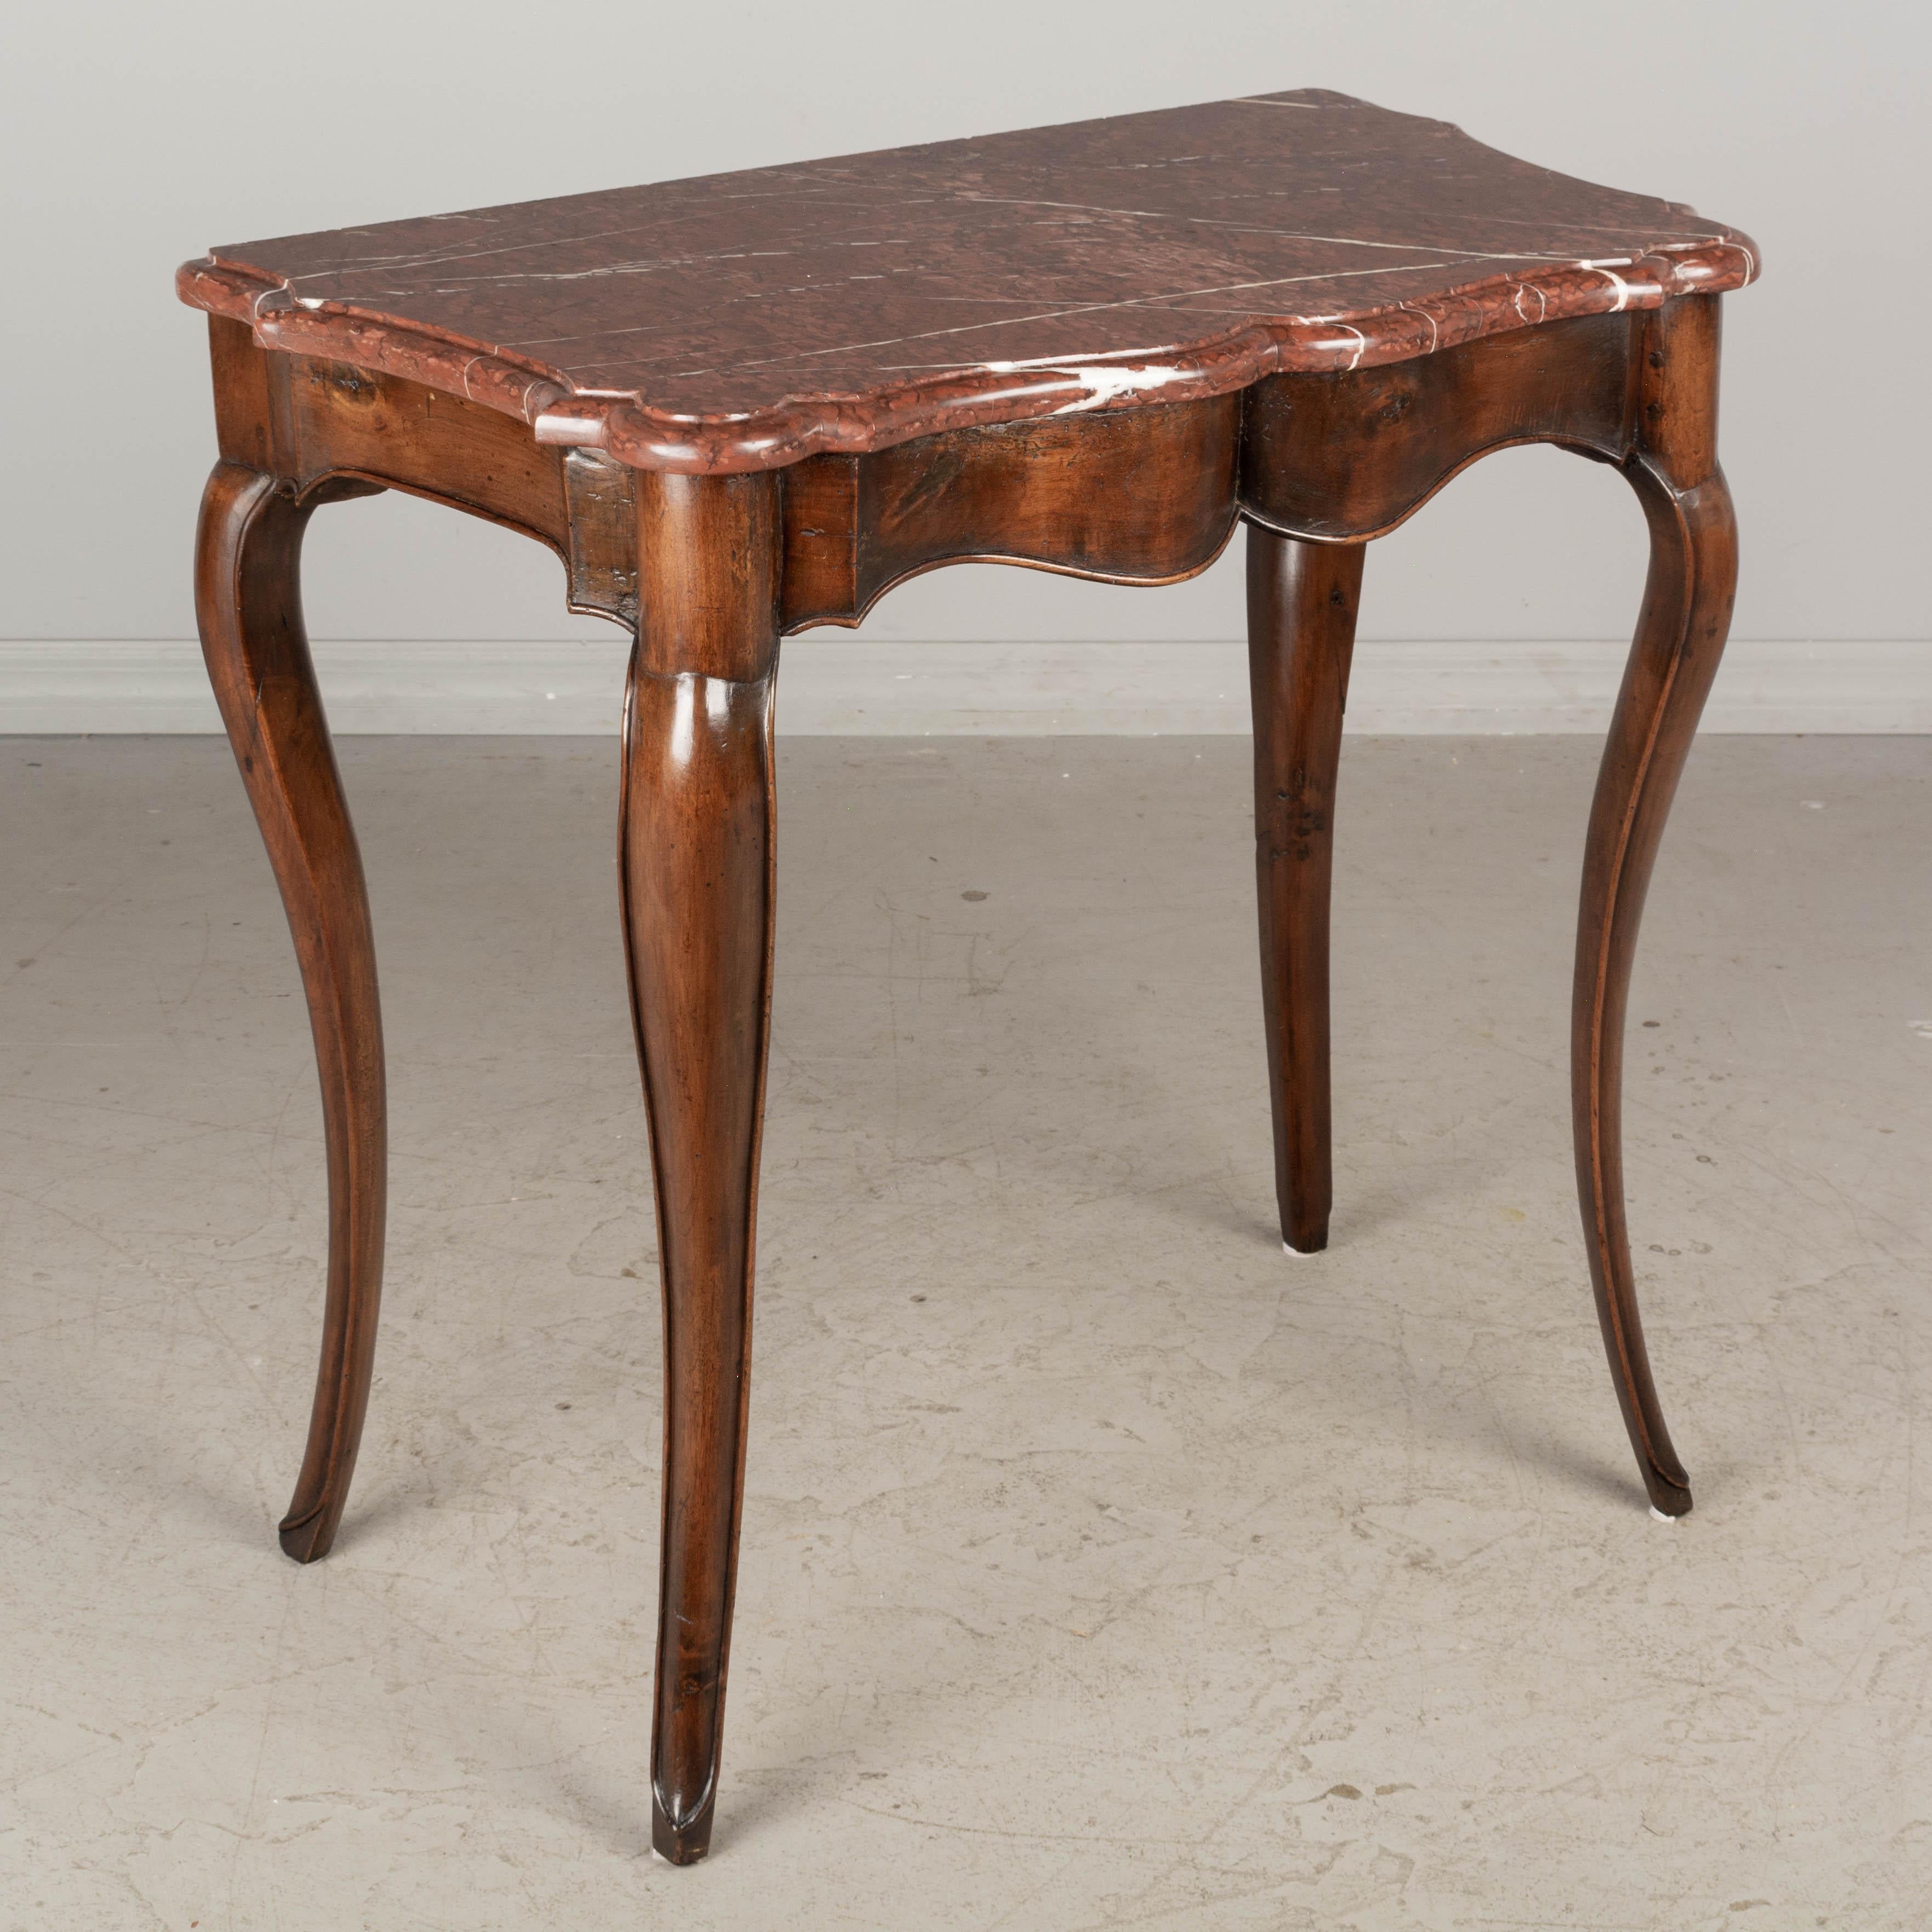 A 19th century French Louis XV style marble top walnut console table with arbalète front and cabriole legs ending in deer hoof feet. Original 1